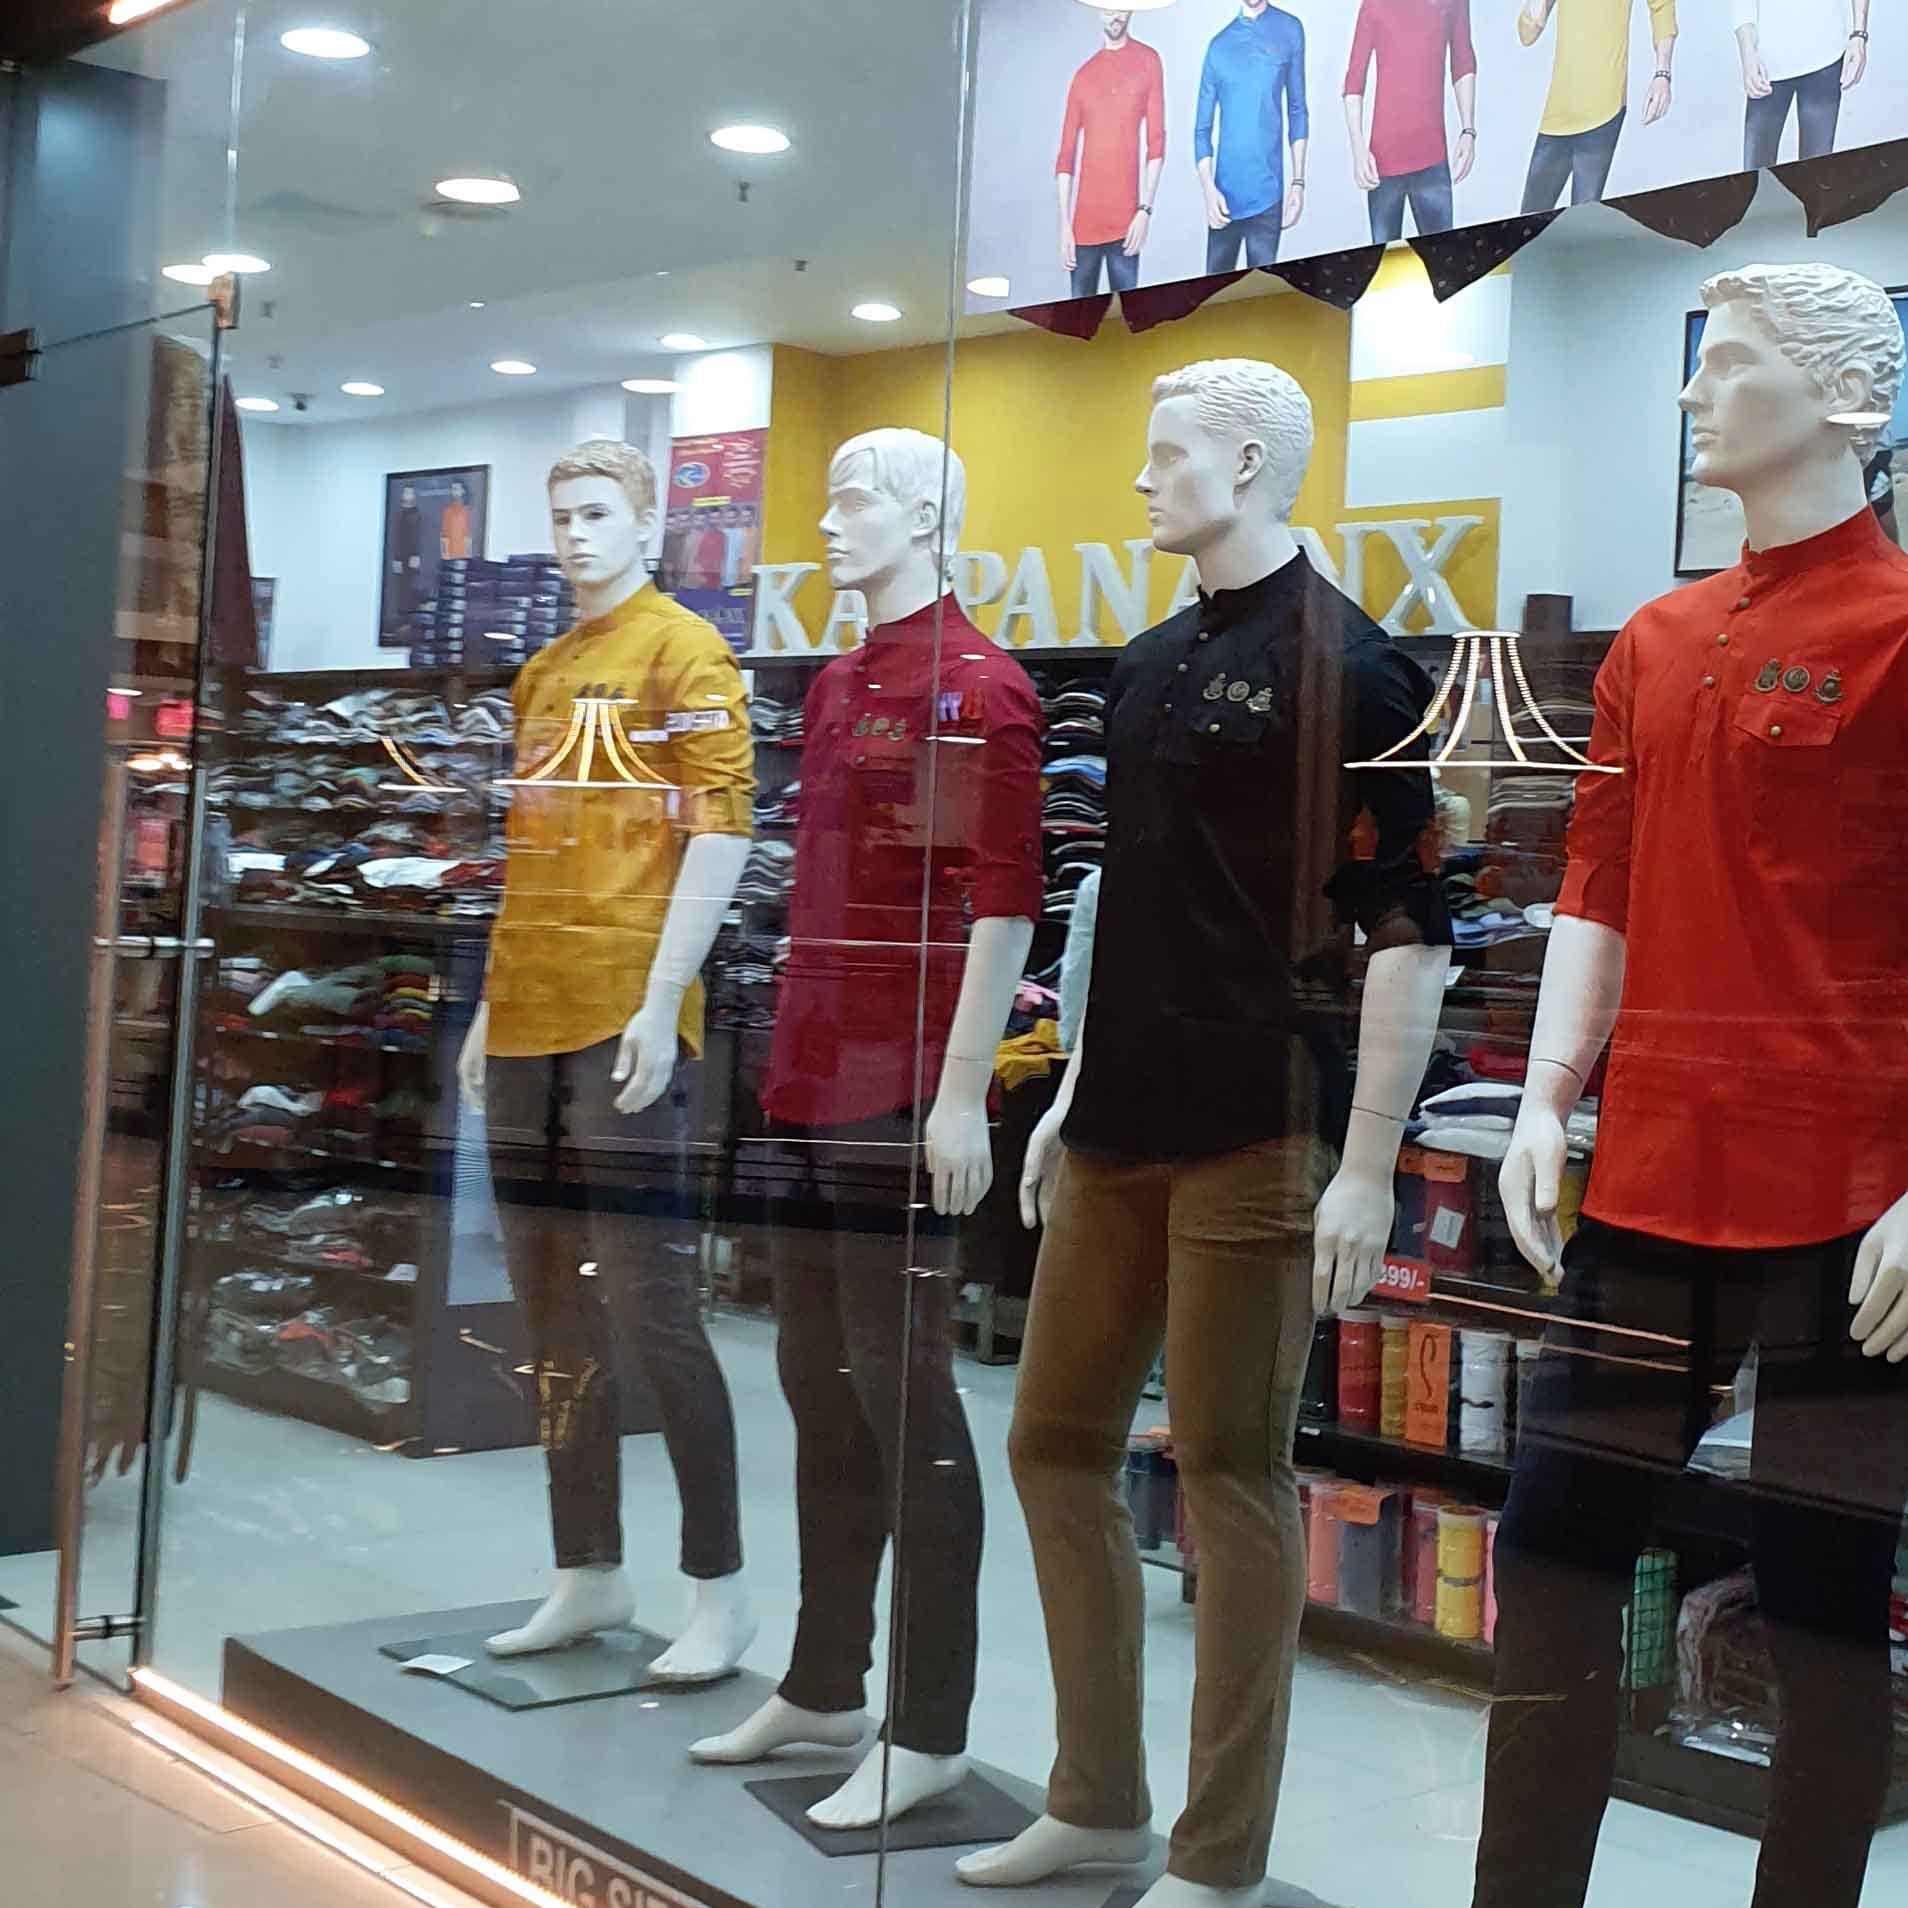 Display window,Display case,Mannequin,Retail,Fashion,Boutique,Window,Building,Shopping mall